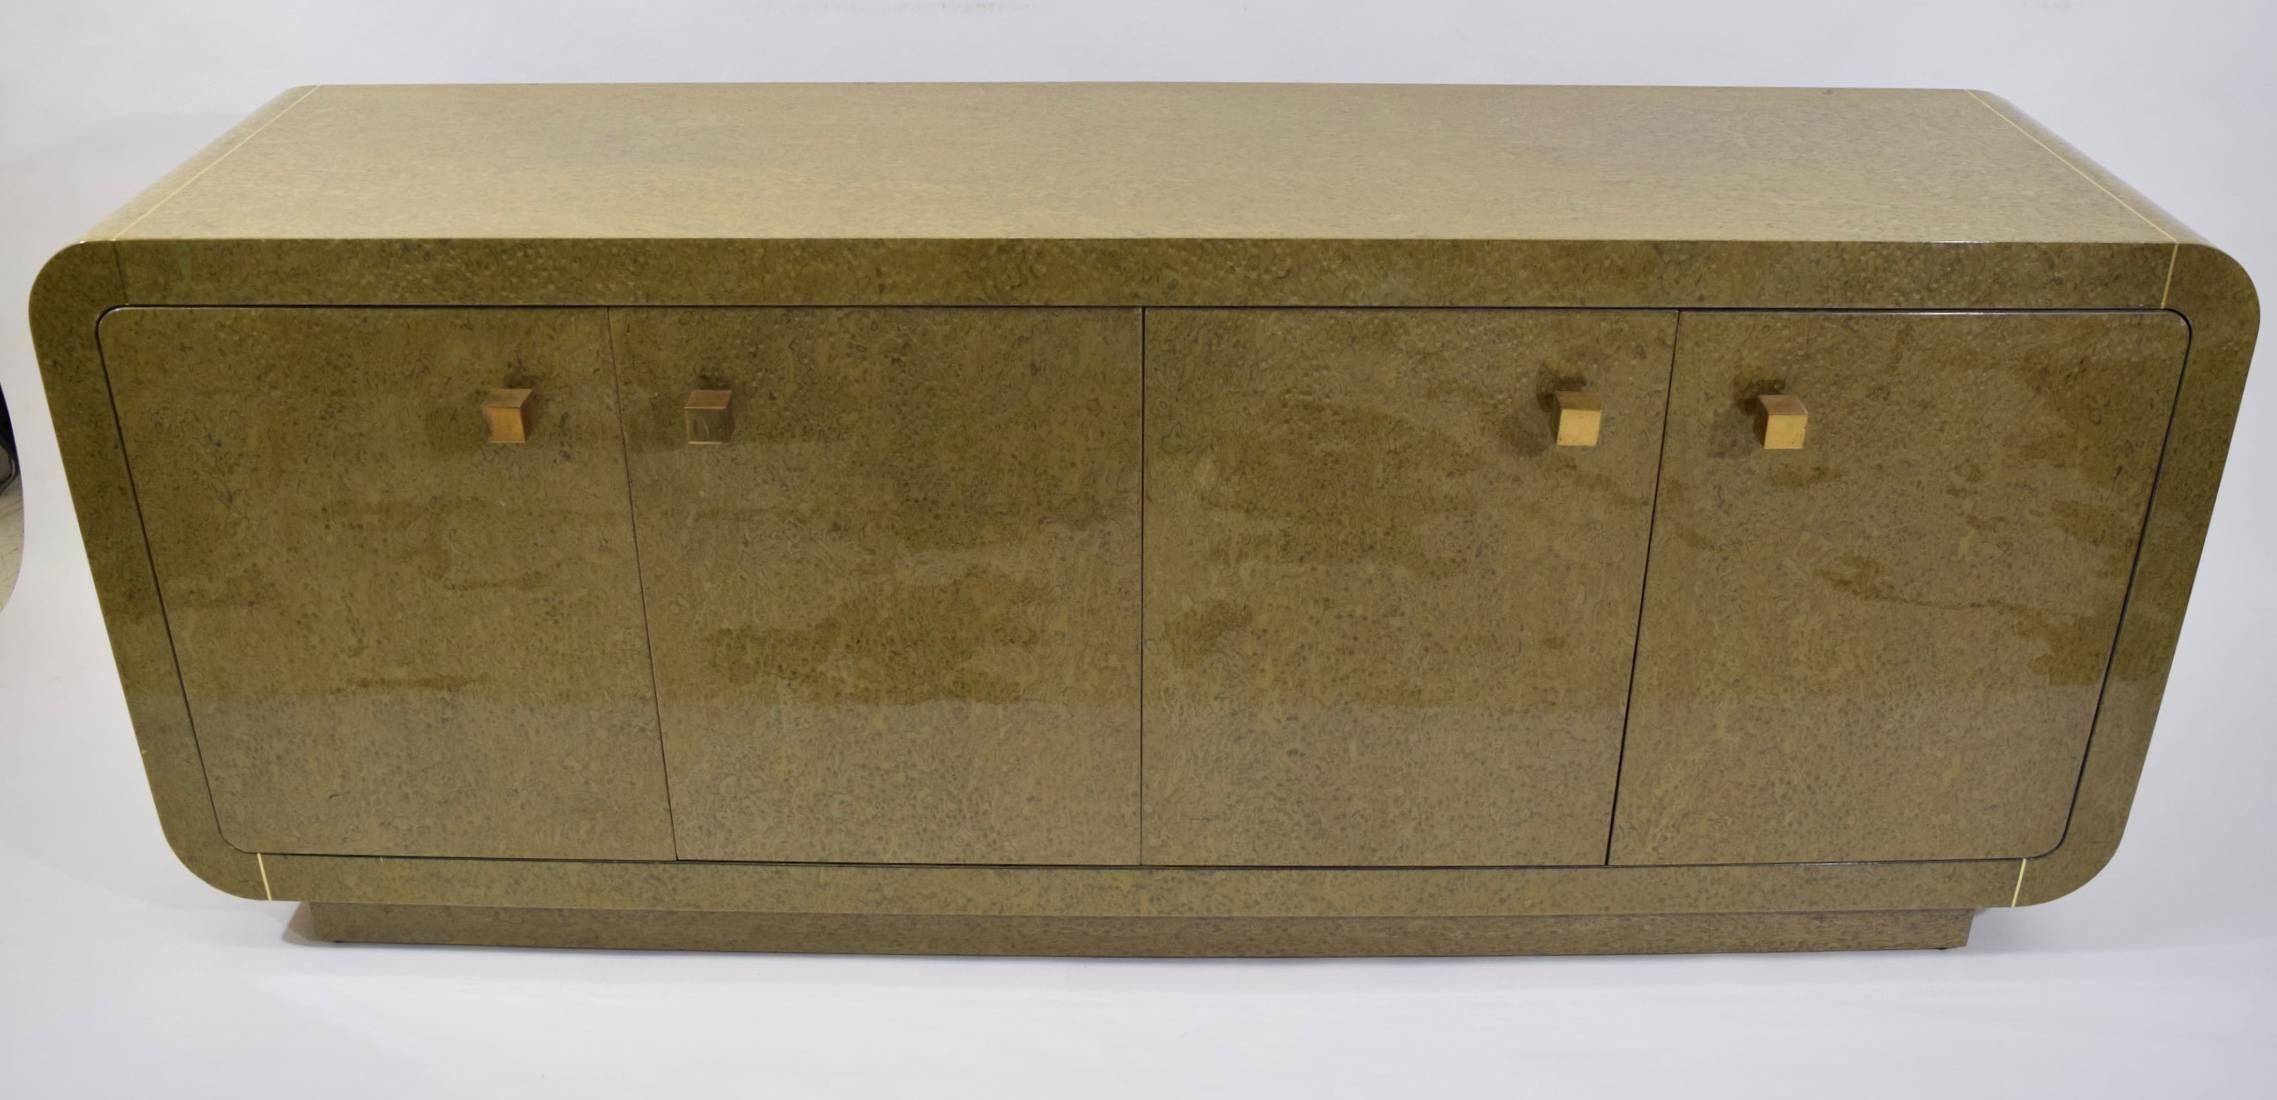 The finish on this is beautiful and exceptional. It is a high gloss bird's-eye style lacquer with brass inlay. Knobs are brass cubes. The credenza is in excellent condition accept for two small marks on the side. We can have these expertly repaired